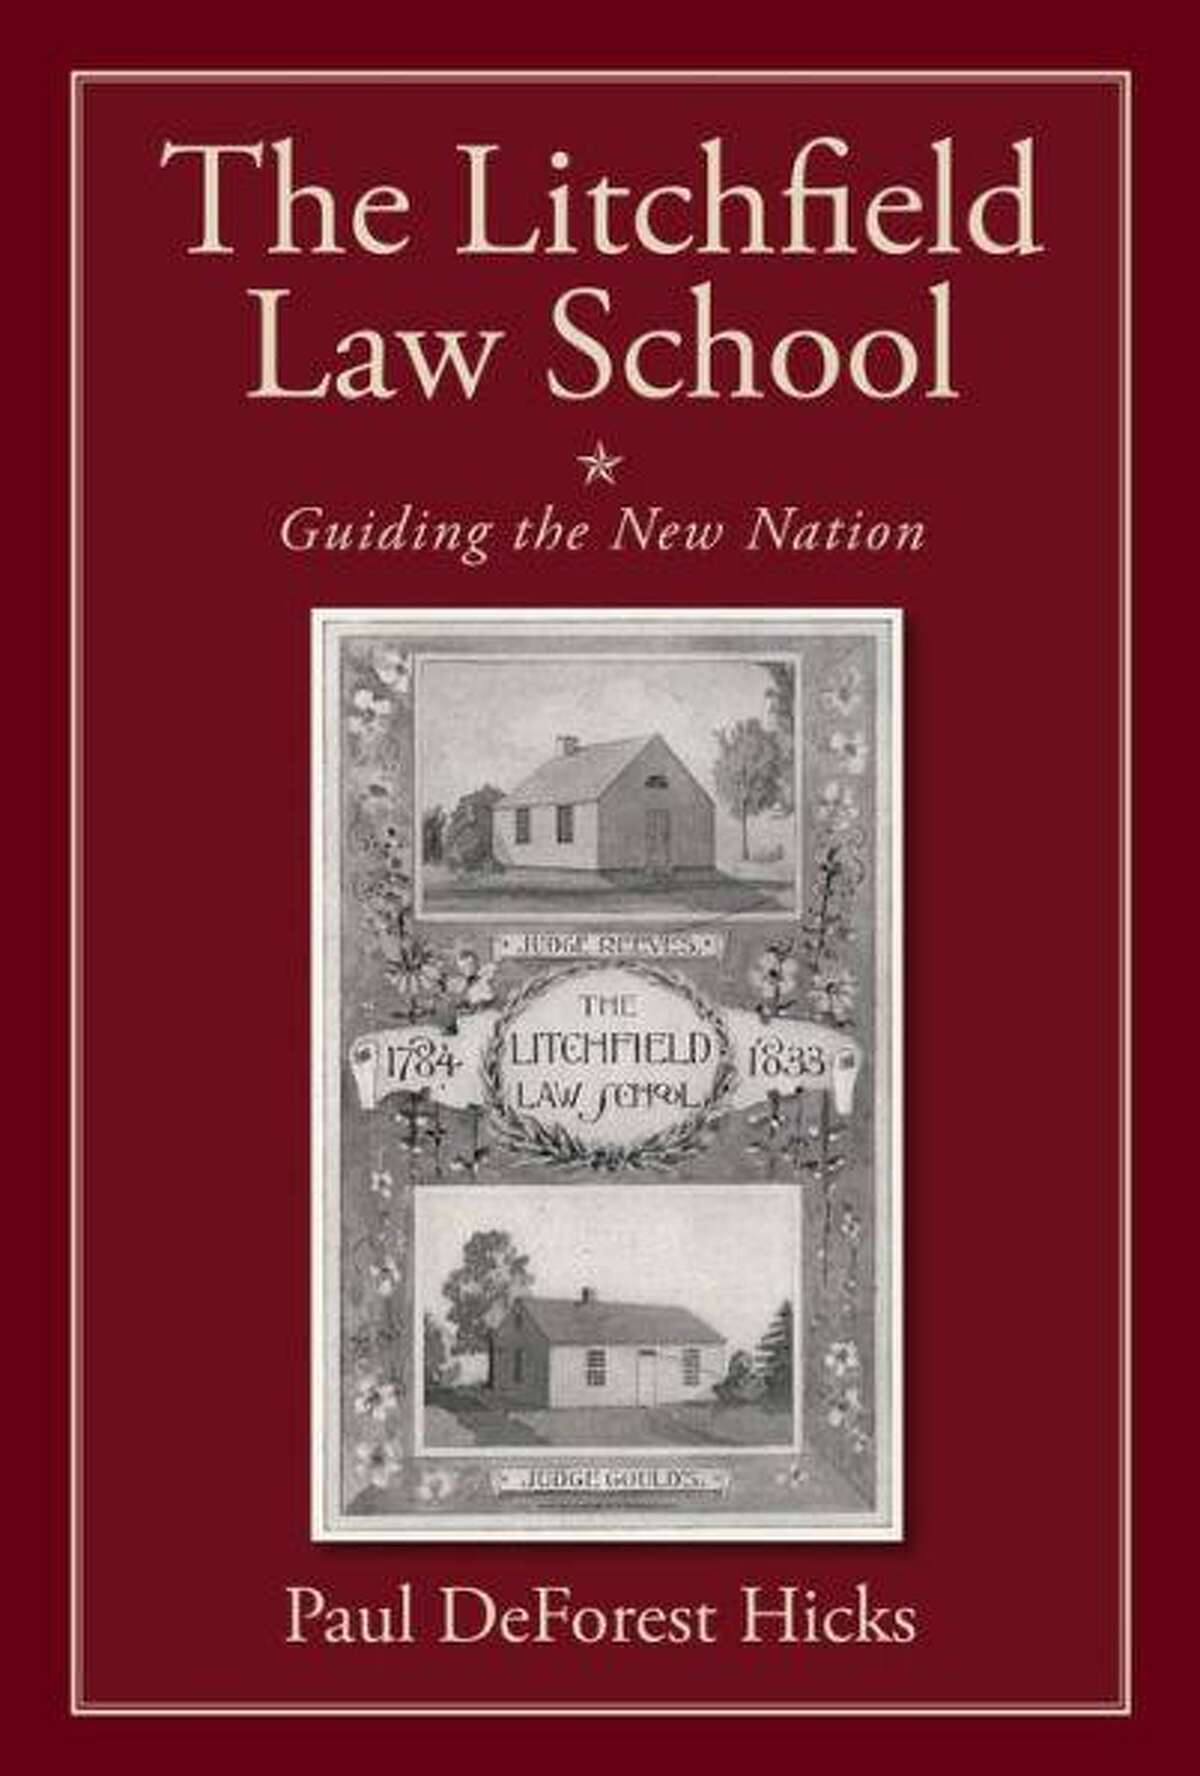 Paul Hicks, author of “The Litchfield Law School: Guiding the New Nation,” will speak before the Retired Men’s Association of Greenwich on Jan. 15. It is free and open to the public. The talk will be at the First Presbyterian Church, with a social break at 10:40 a.m., followed by the speaker at 11 a.m.